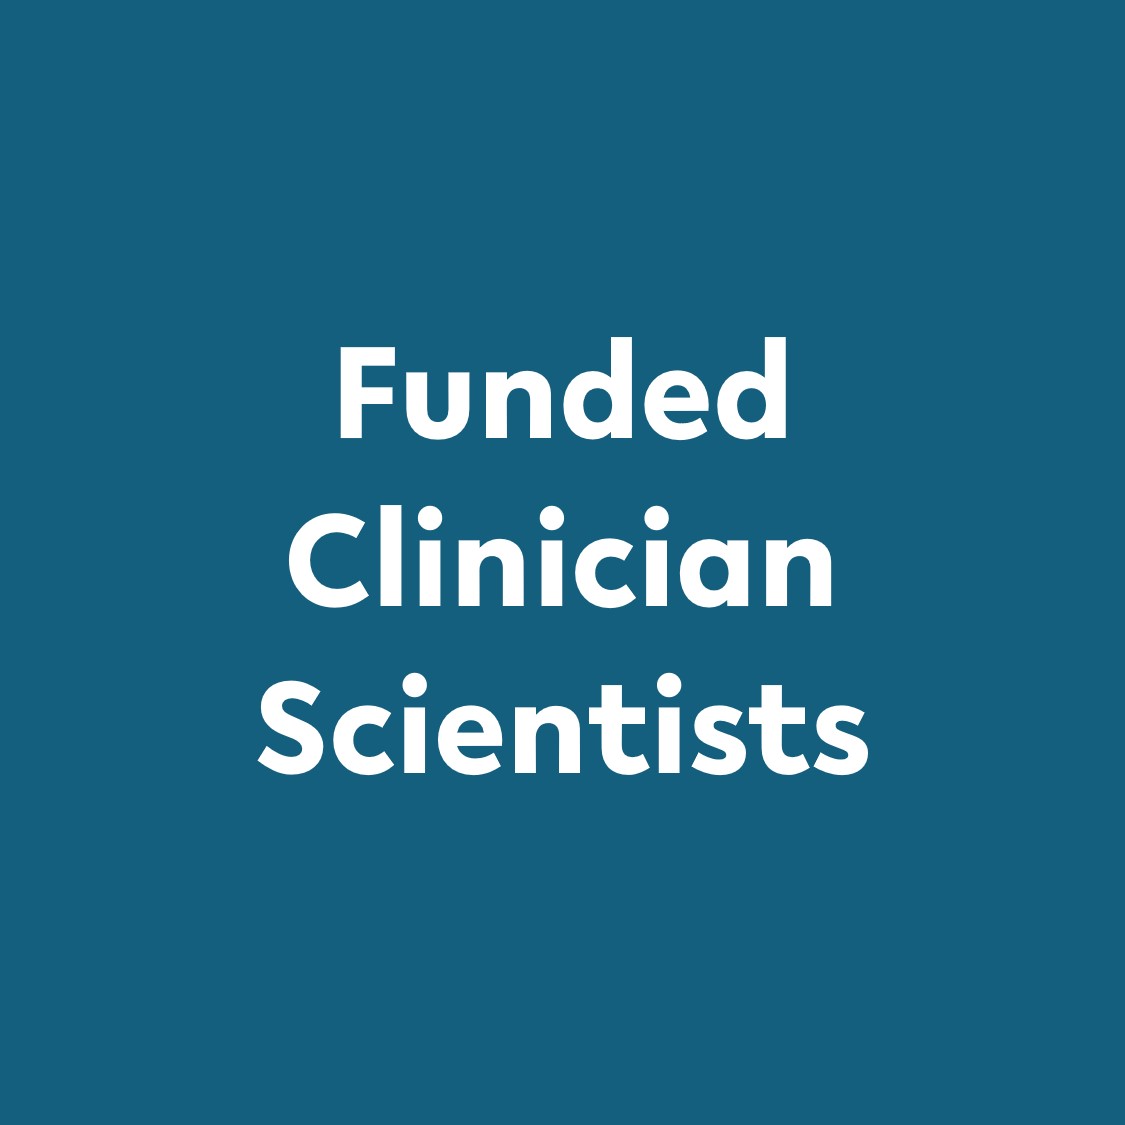 Funded Clinician Scientists